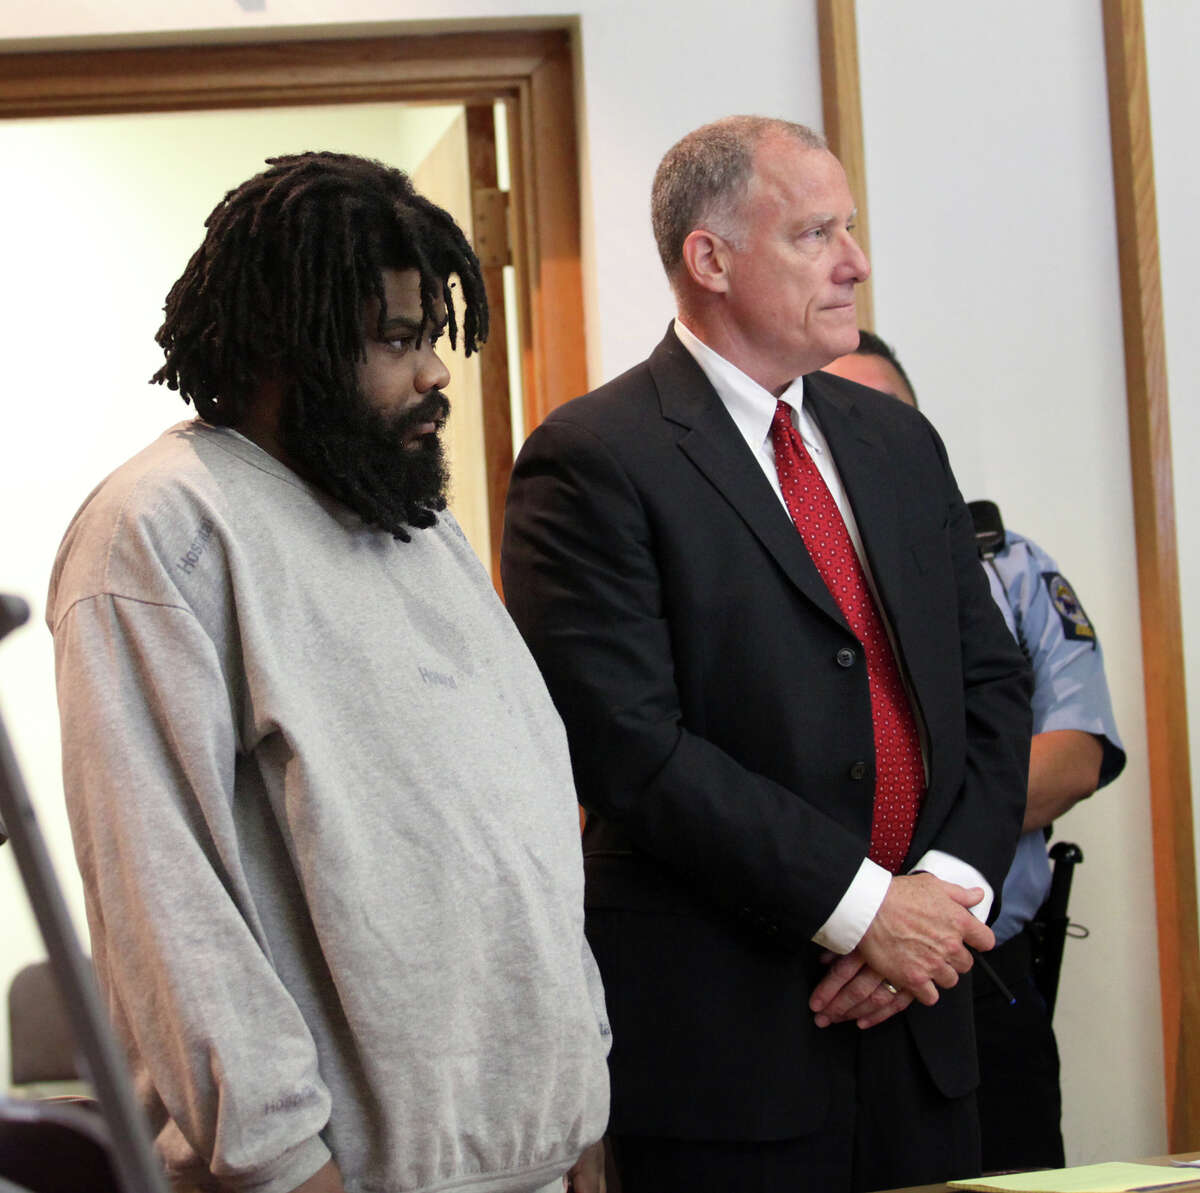 Tyree Smith, left, stands with public defender Joseph Bruckmann on the first day of trial before a three judge panel in Bridgeport, Conn. on Monday, July 1, 2013. Smith is charged with the murder of Angel "Tun Tun" Gonzalez.